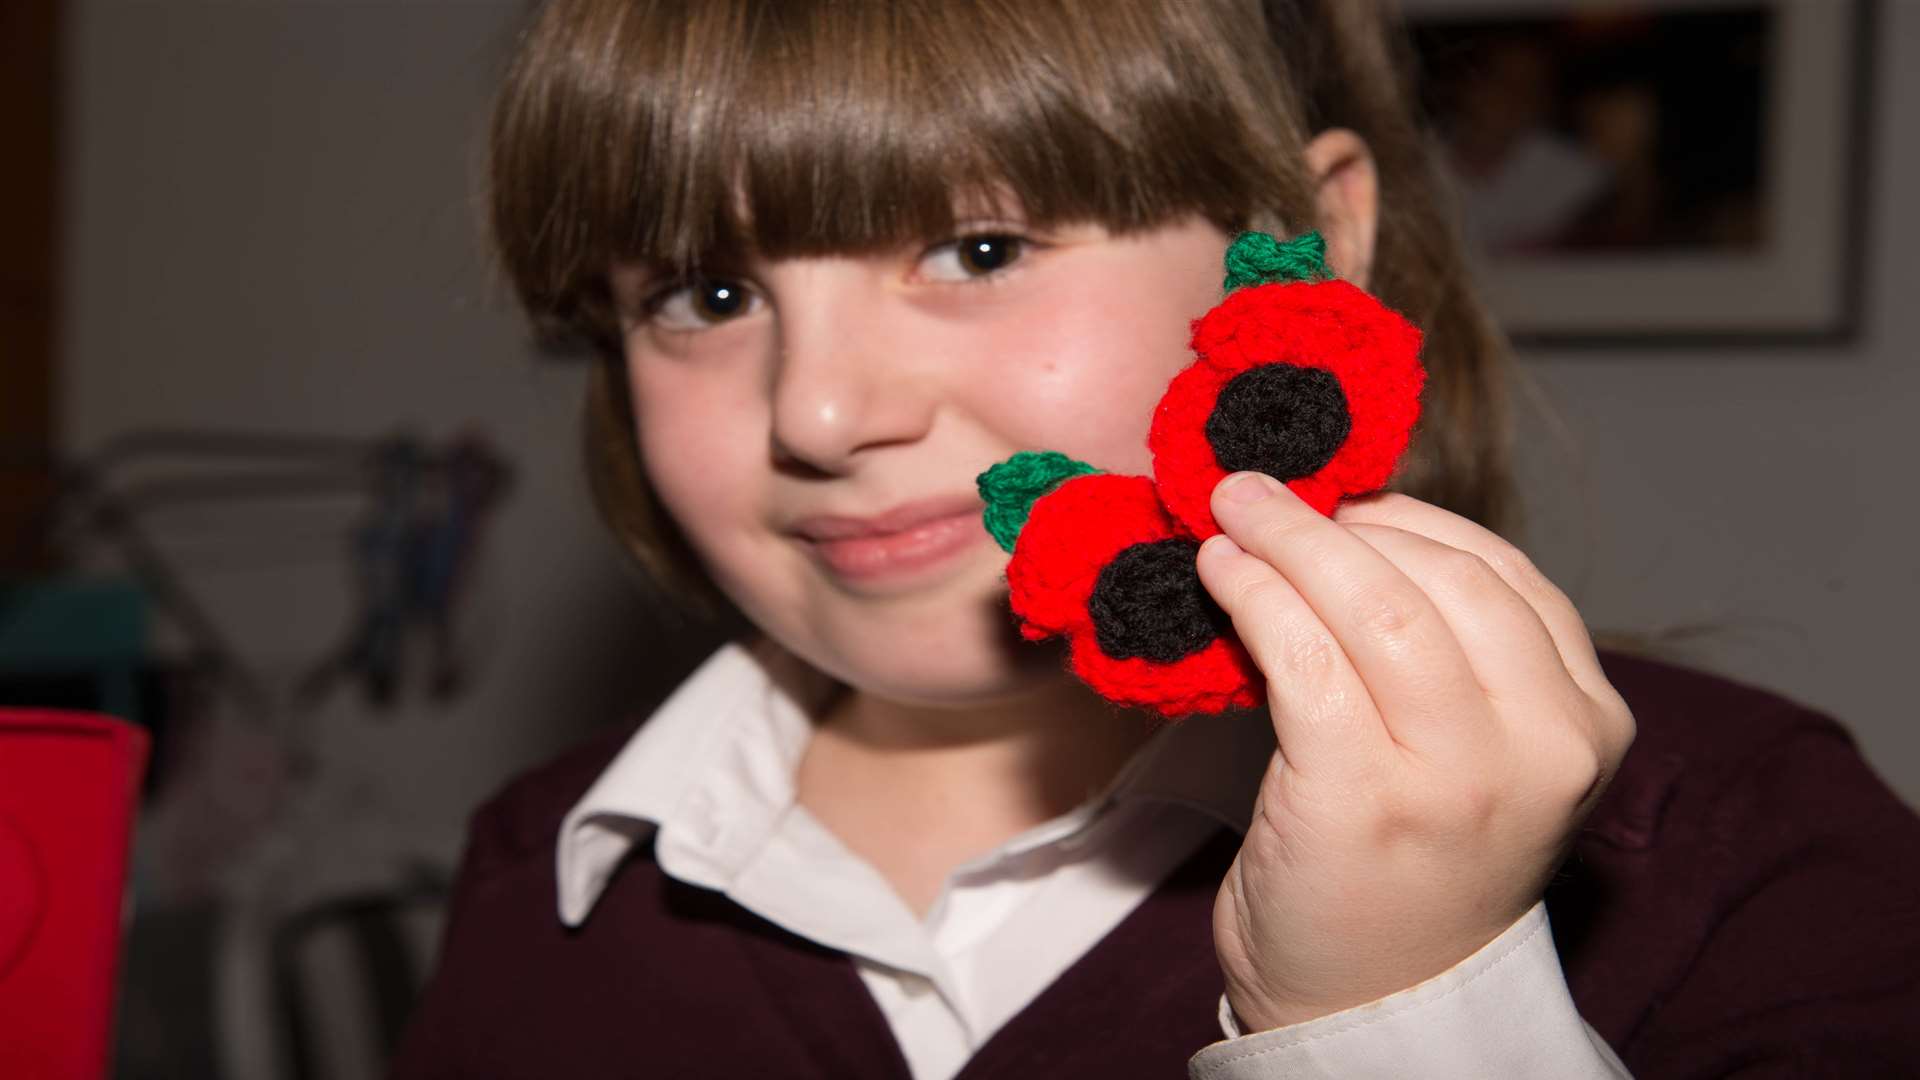 Charlotte-Mae has been crocheting poppies